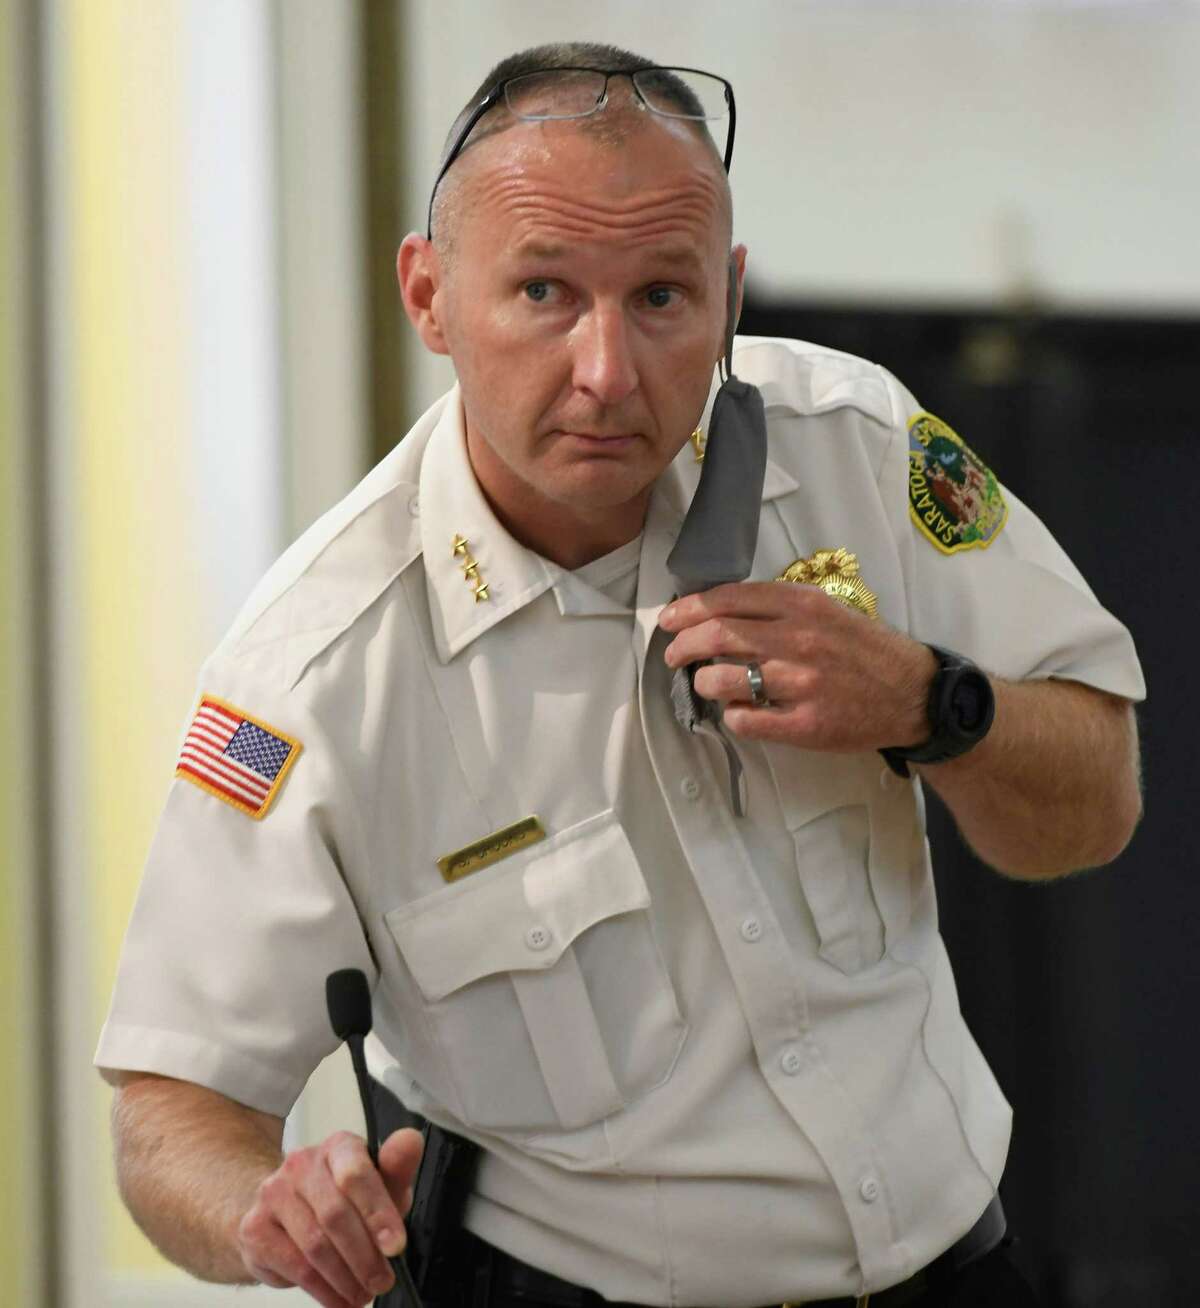 Saratoga Springs police chief Shane Crooks answers questions from a resident during the police task force meeting at the Canfield Casino building in 2020, in Saratoga Springs. (Jenn March, Special to the Times Union)